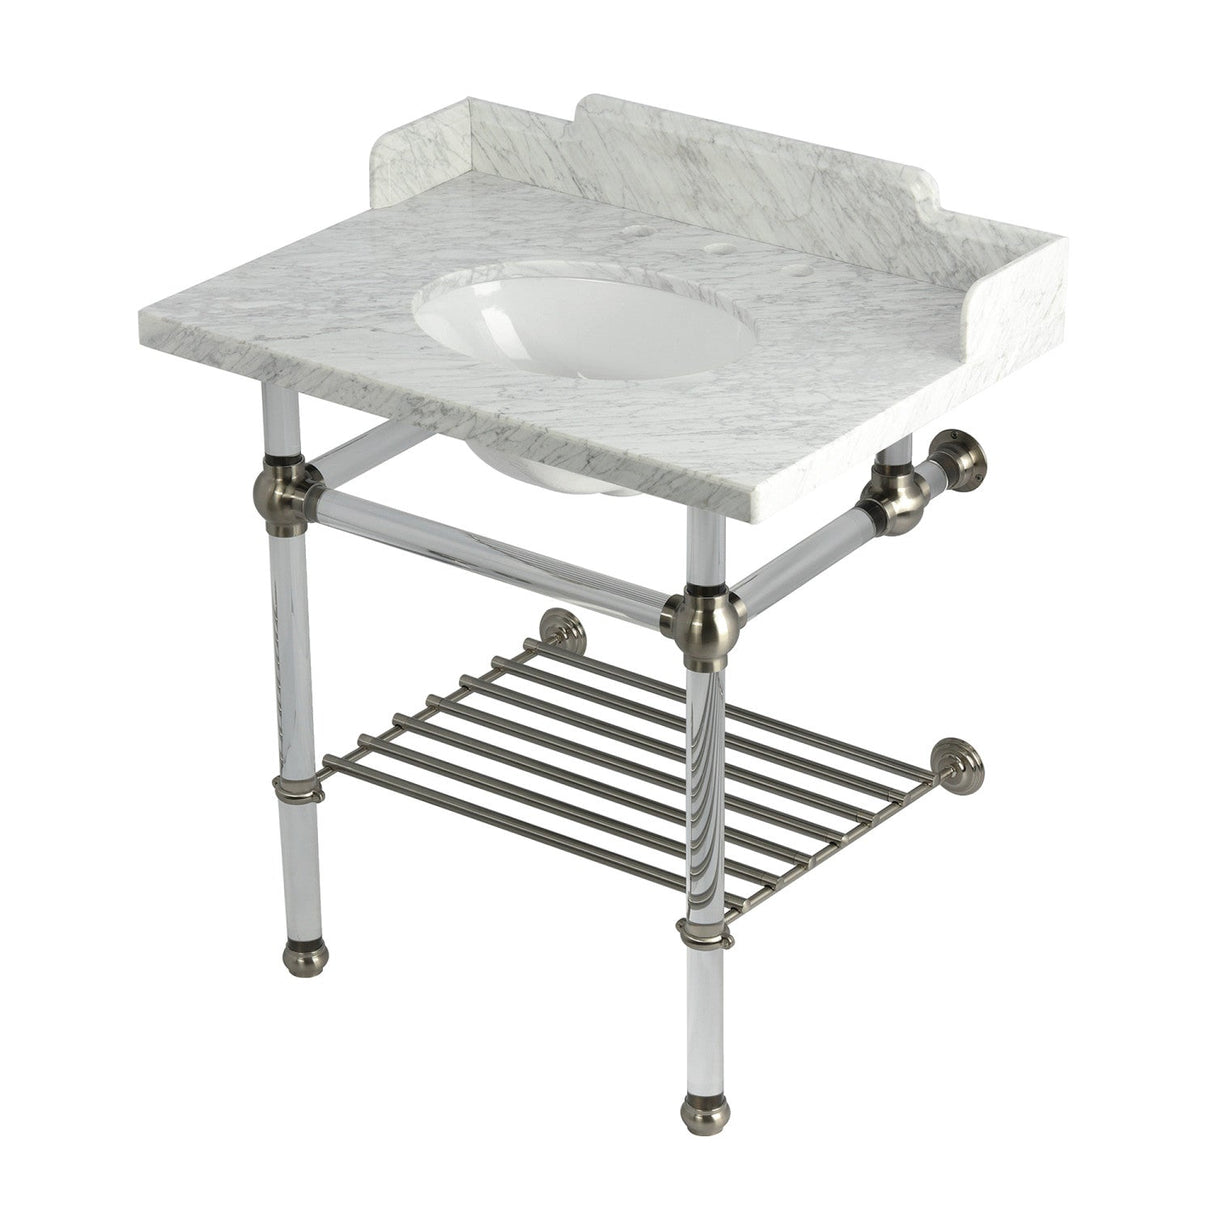 Pemberton LMS3030MAB8 30-Inch Console Sink with Acrylic Legs (8-Inch, 3 Hole), Marble White/Brushed Nickel